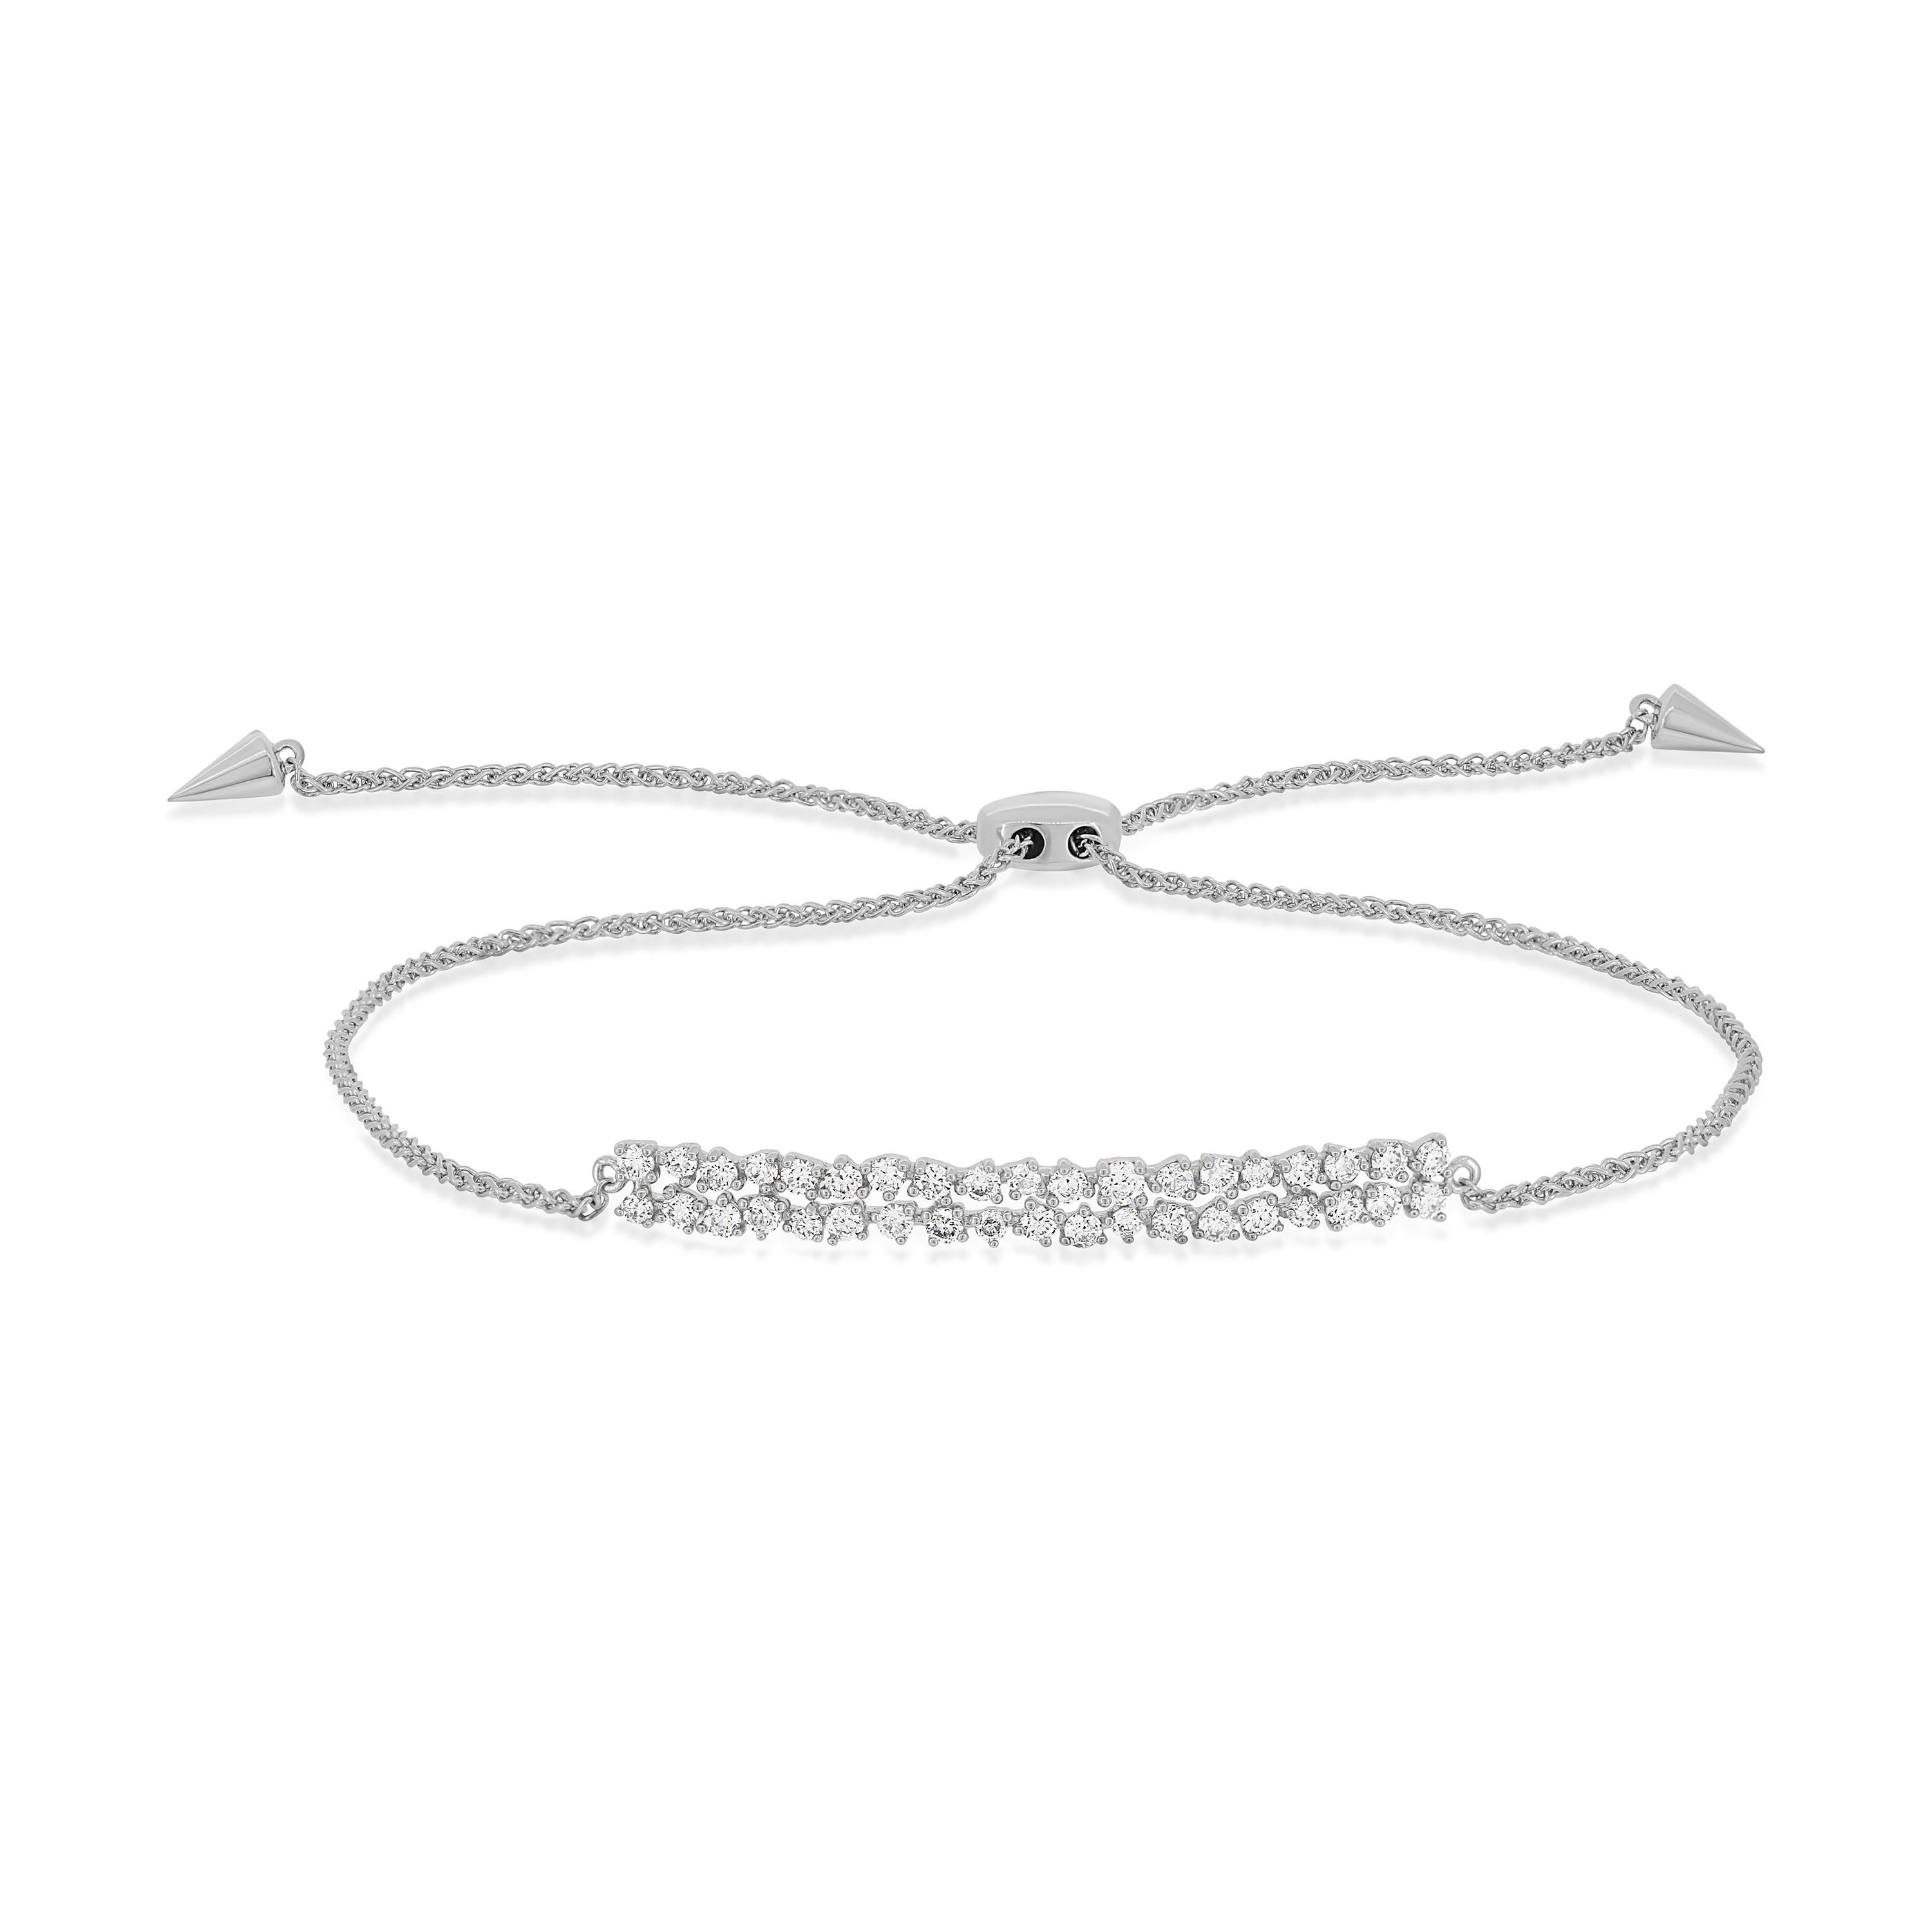 Chic yet stylish, this bracelet features a sleek rectangular bar sparkling with pave set 38 round cut diamonds. This bracelet is showcased with exceptional quality diamonds with a color grading of G-H color and a minimum clarity of I1. This bracelet